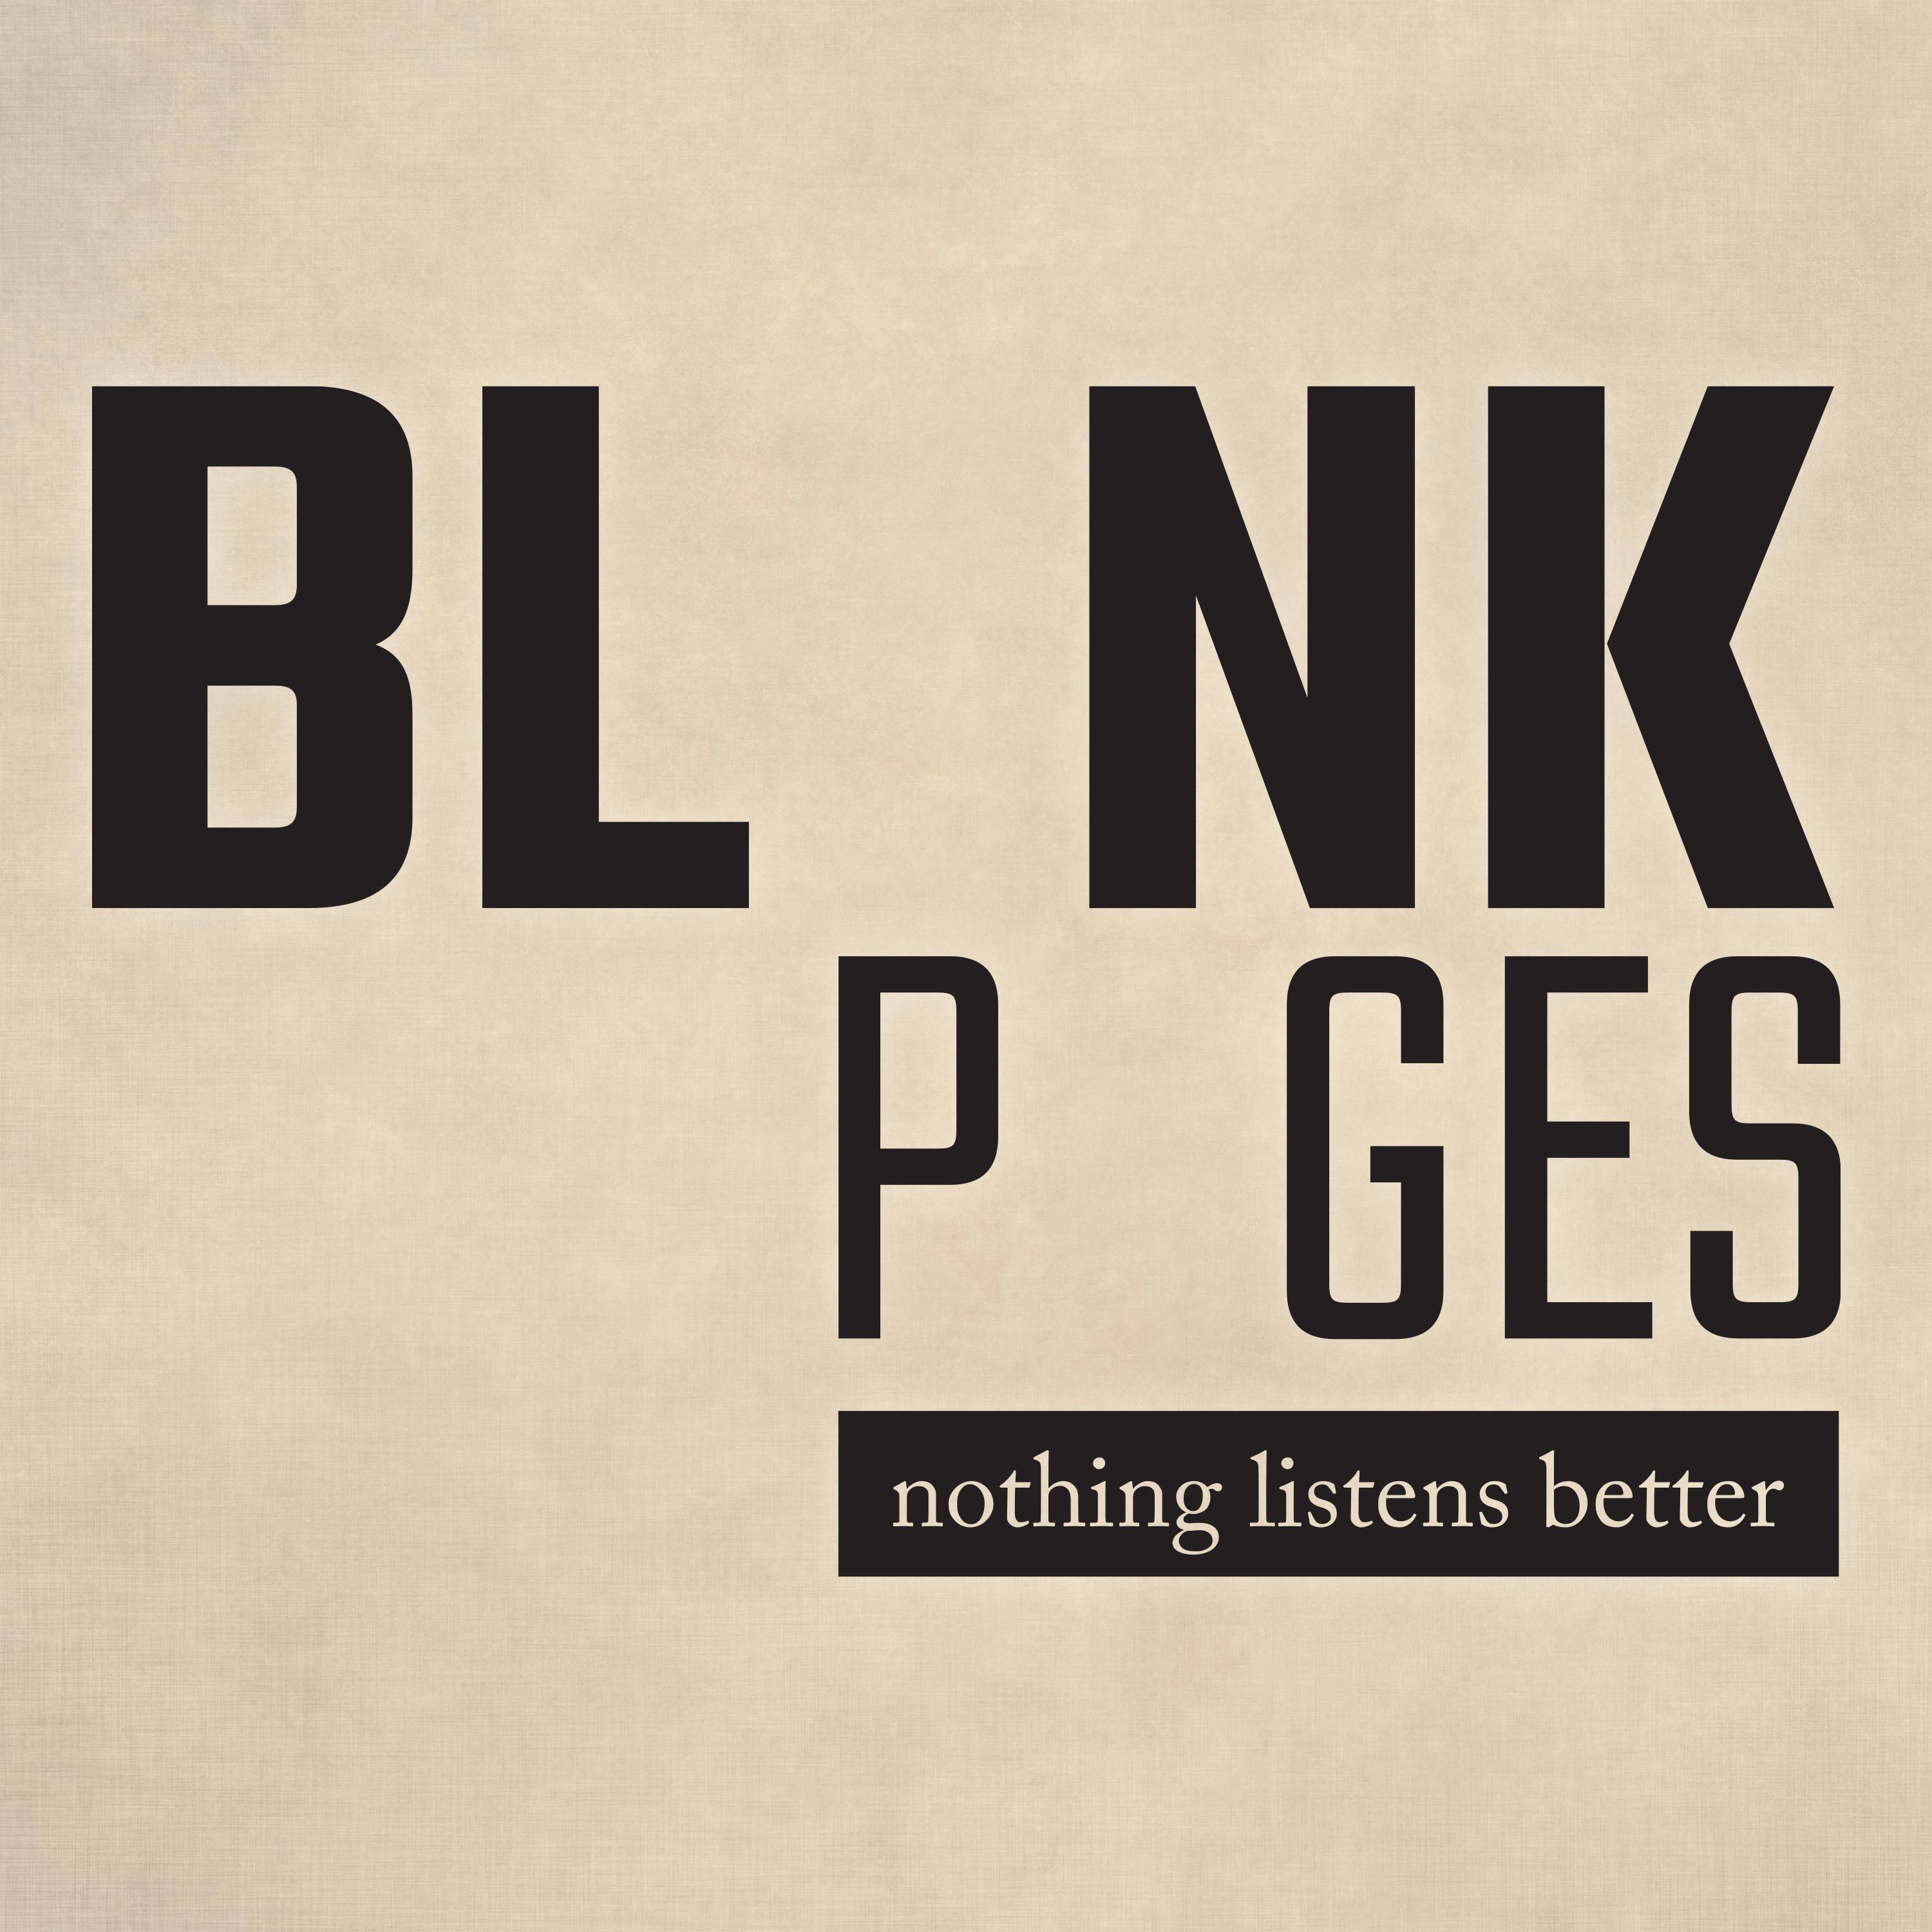 The BL NK P ges Podcast